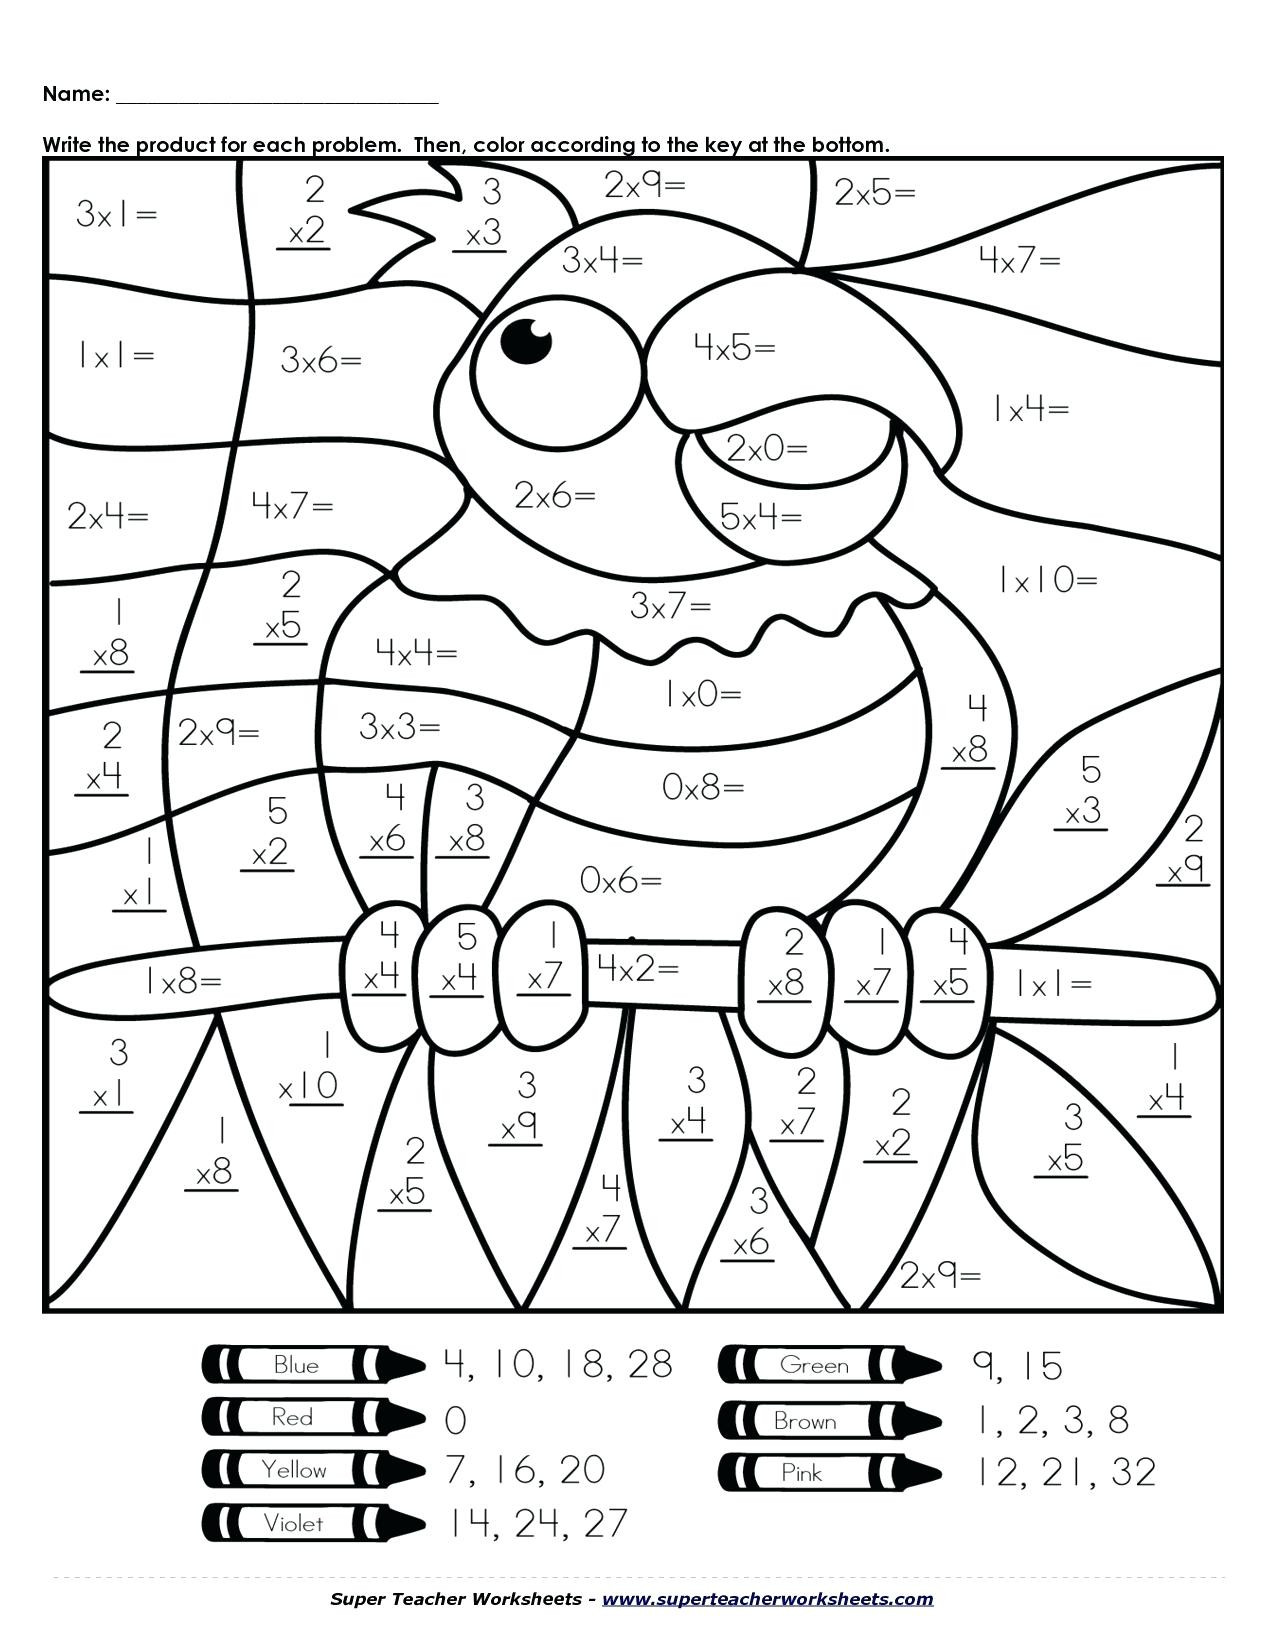 Coloring Math Worksheets 2nd Grade Math Sheets for 2nd Grade – Lifestyletravelsub